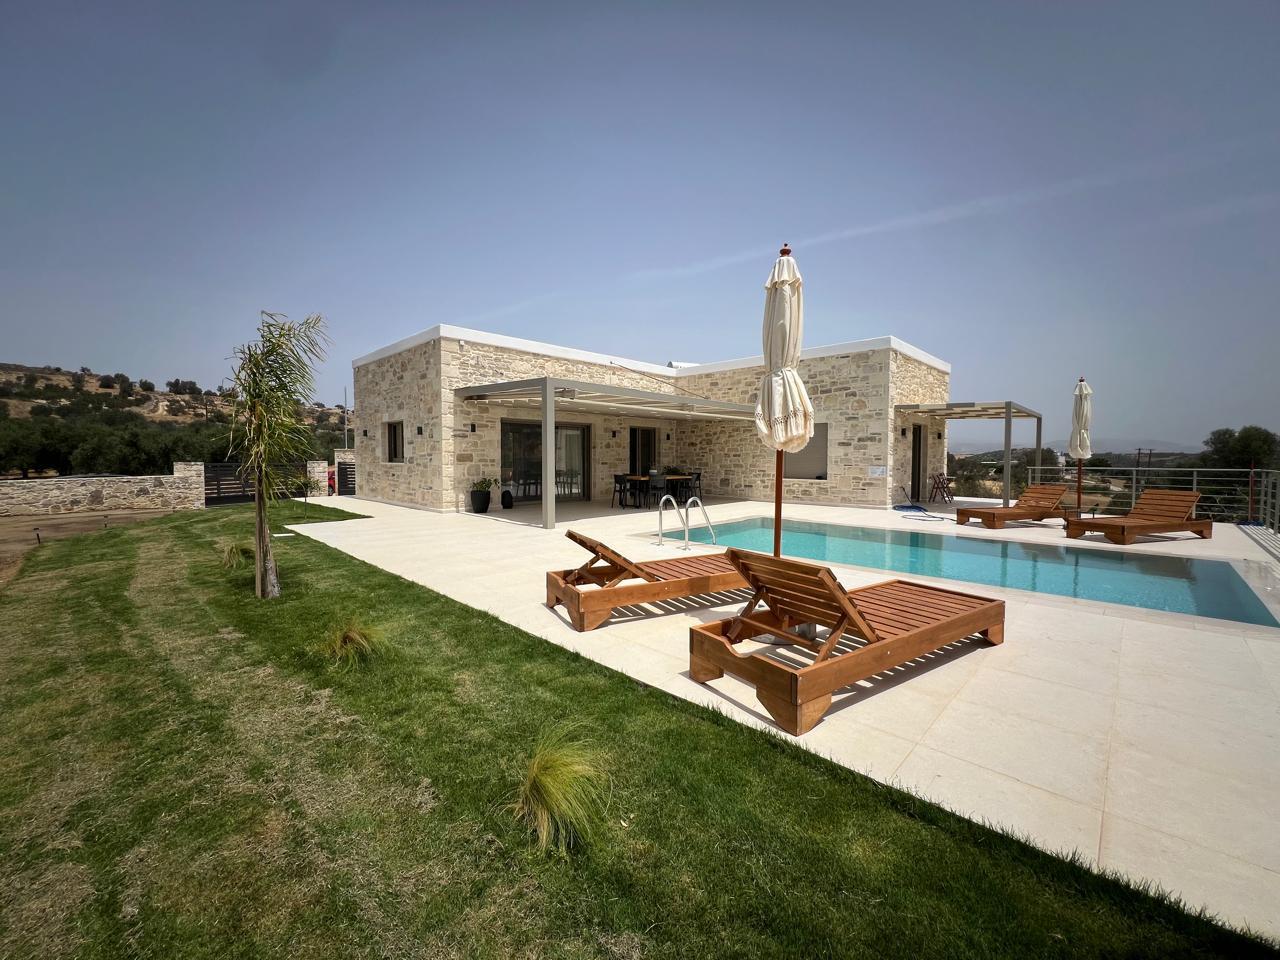 Modern villa sourrounded by olive trees